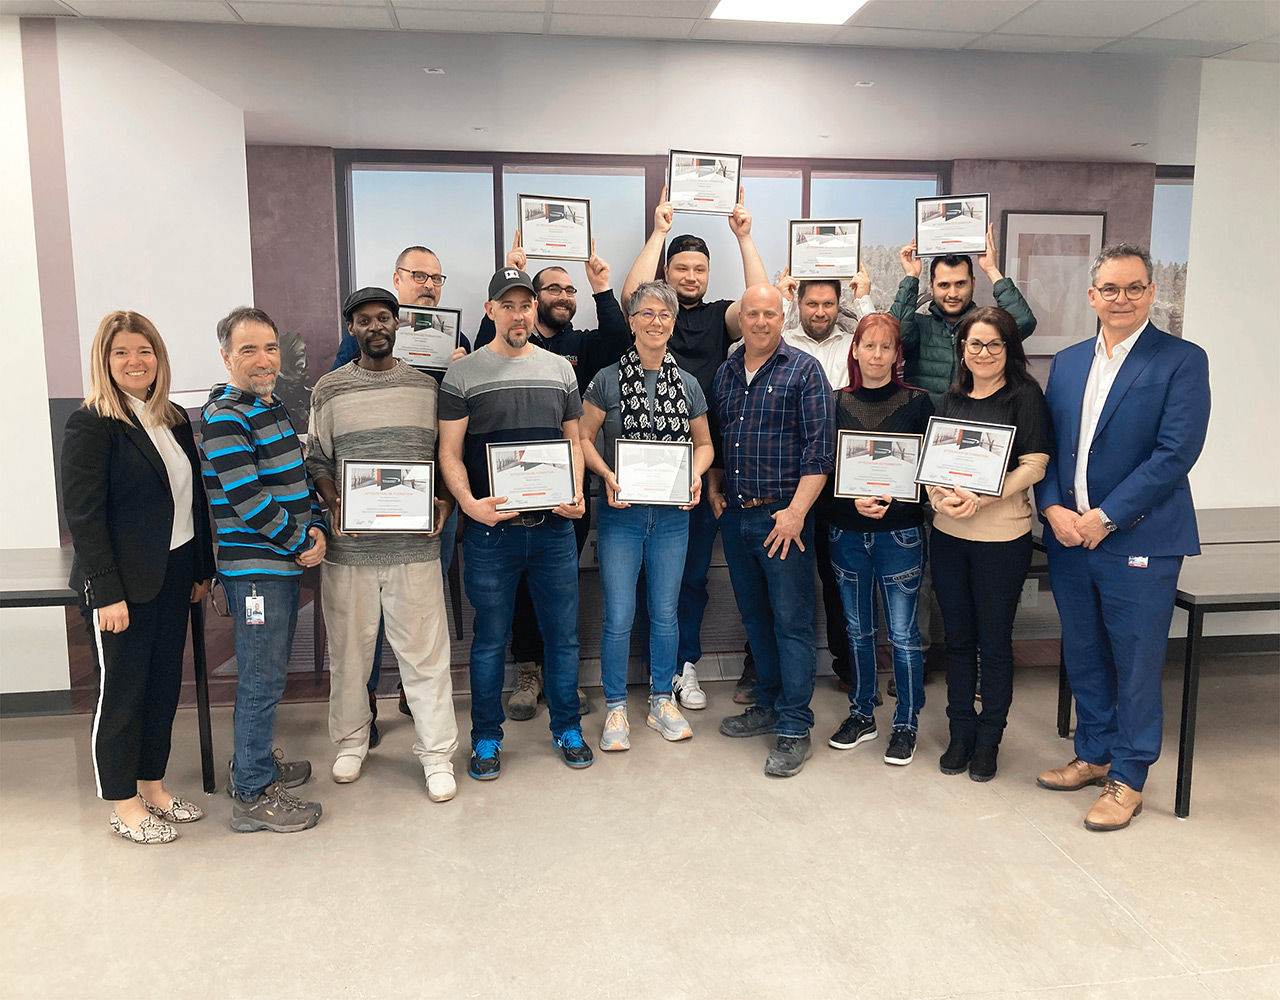 A third cohort of Novatech Group employees receive their vocational diplomas